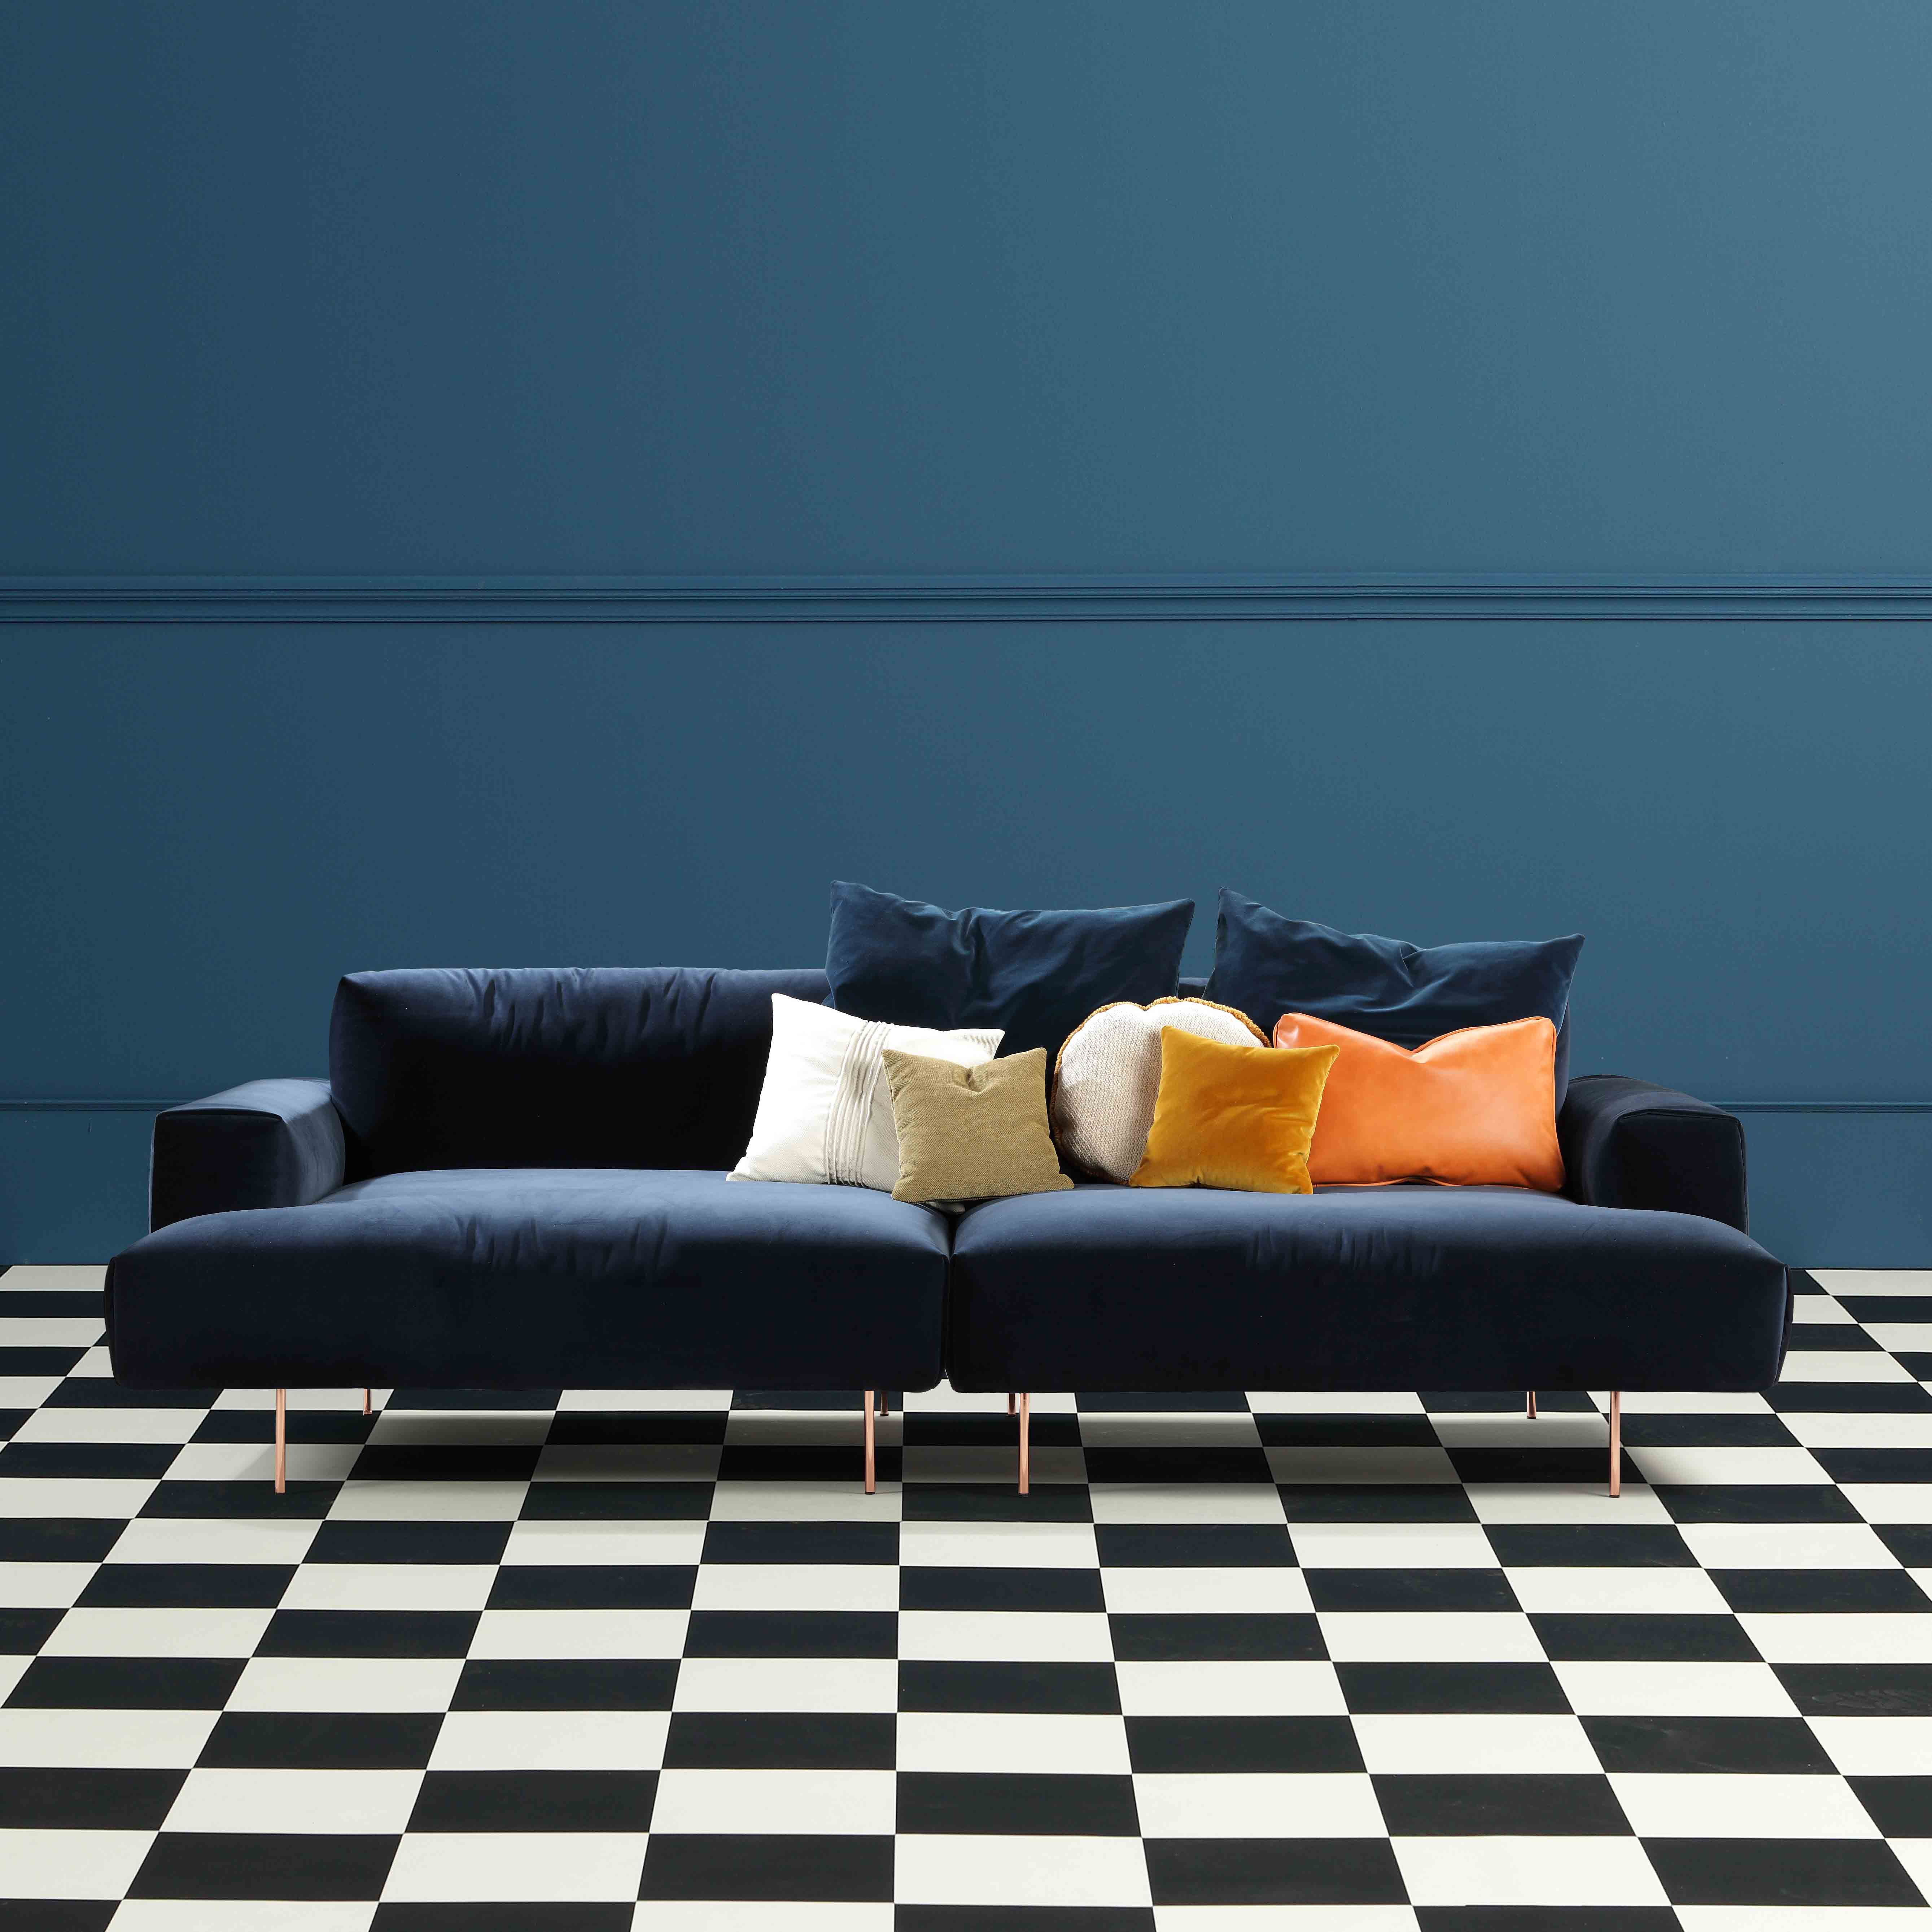 Sancal launches Tiptoe sofa as part of Majestic Collection